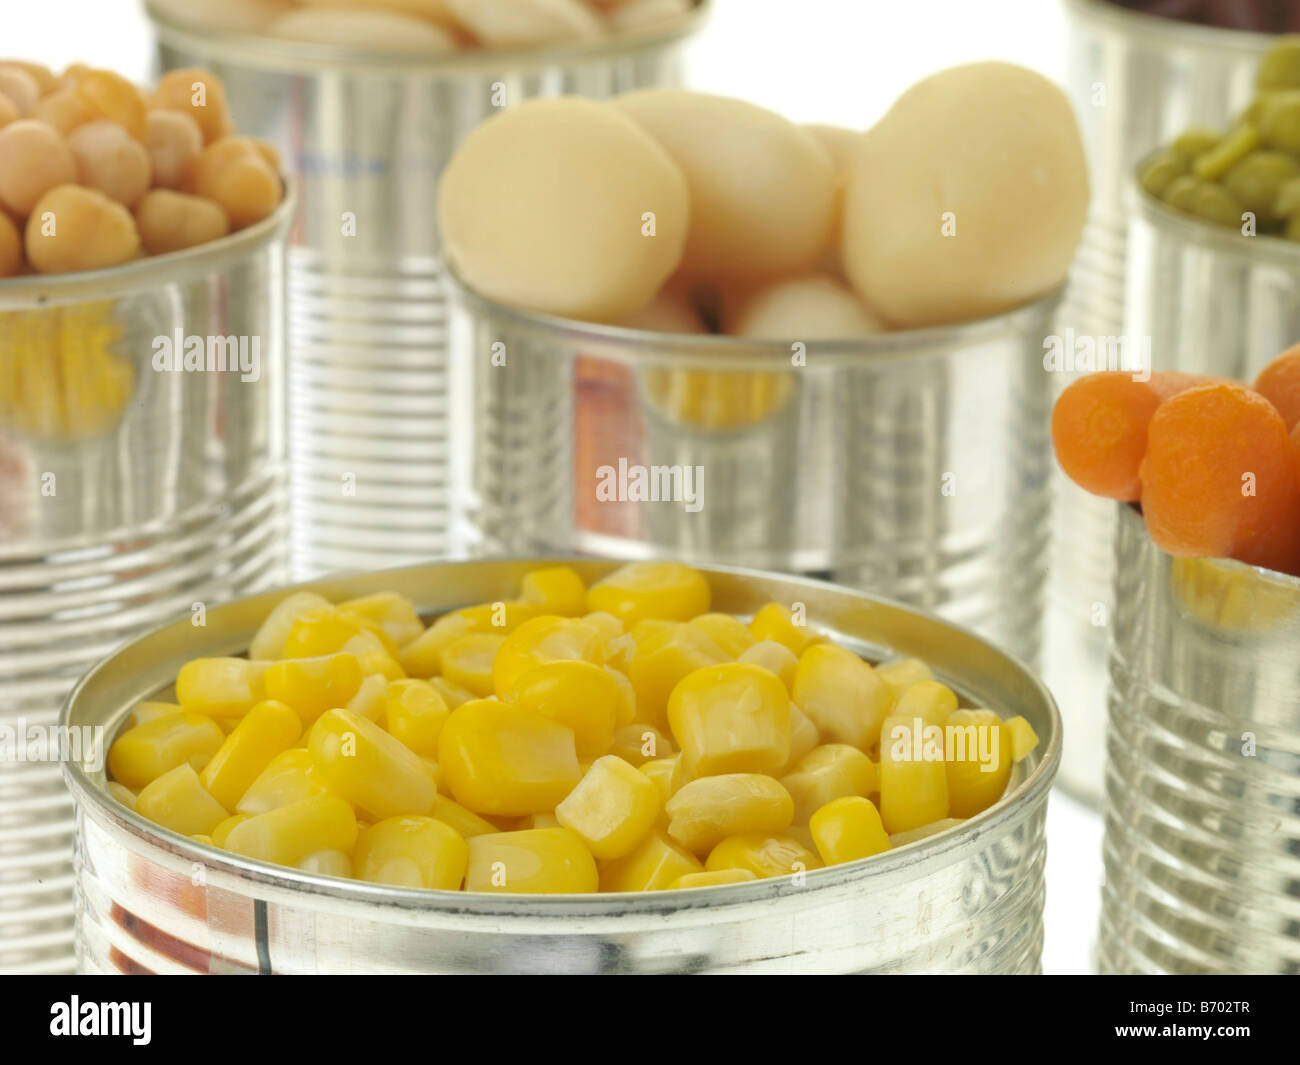 Tins Of Sweetcorn And Beans High Resolution Stock Photography and